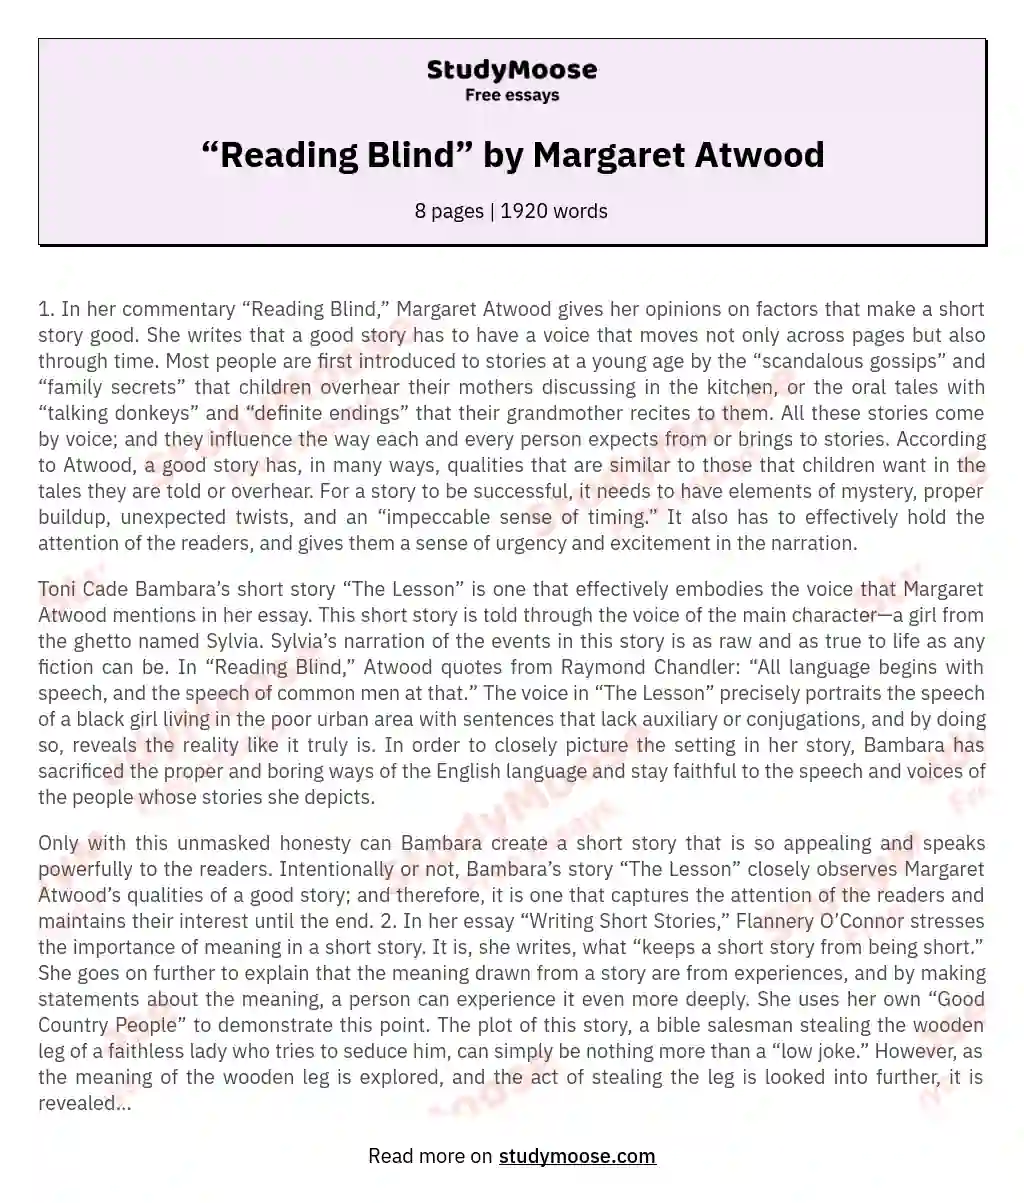 “Reading Blind” by Margaret Atwood essay